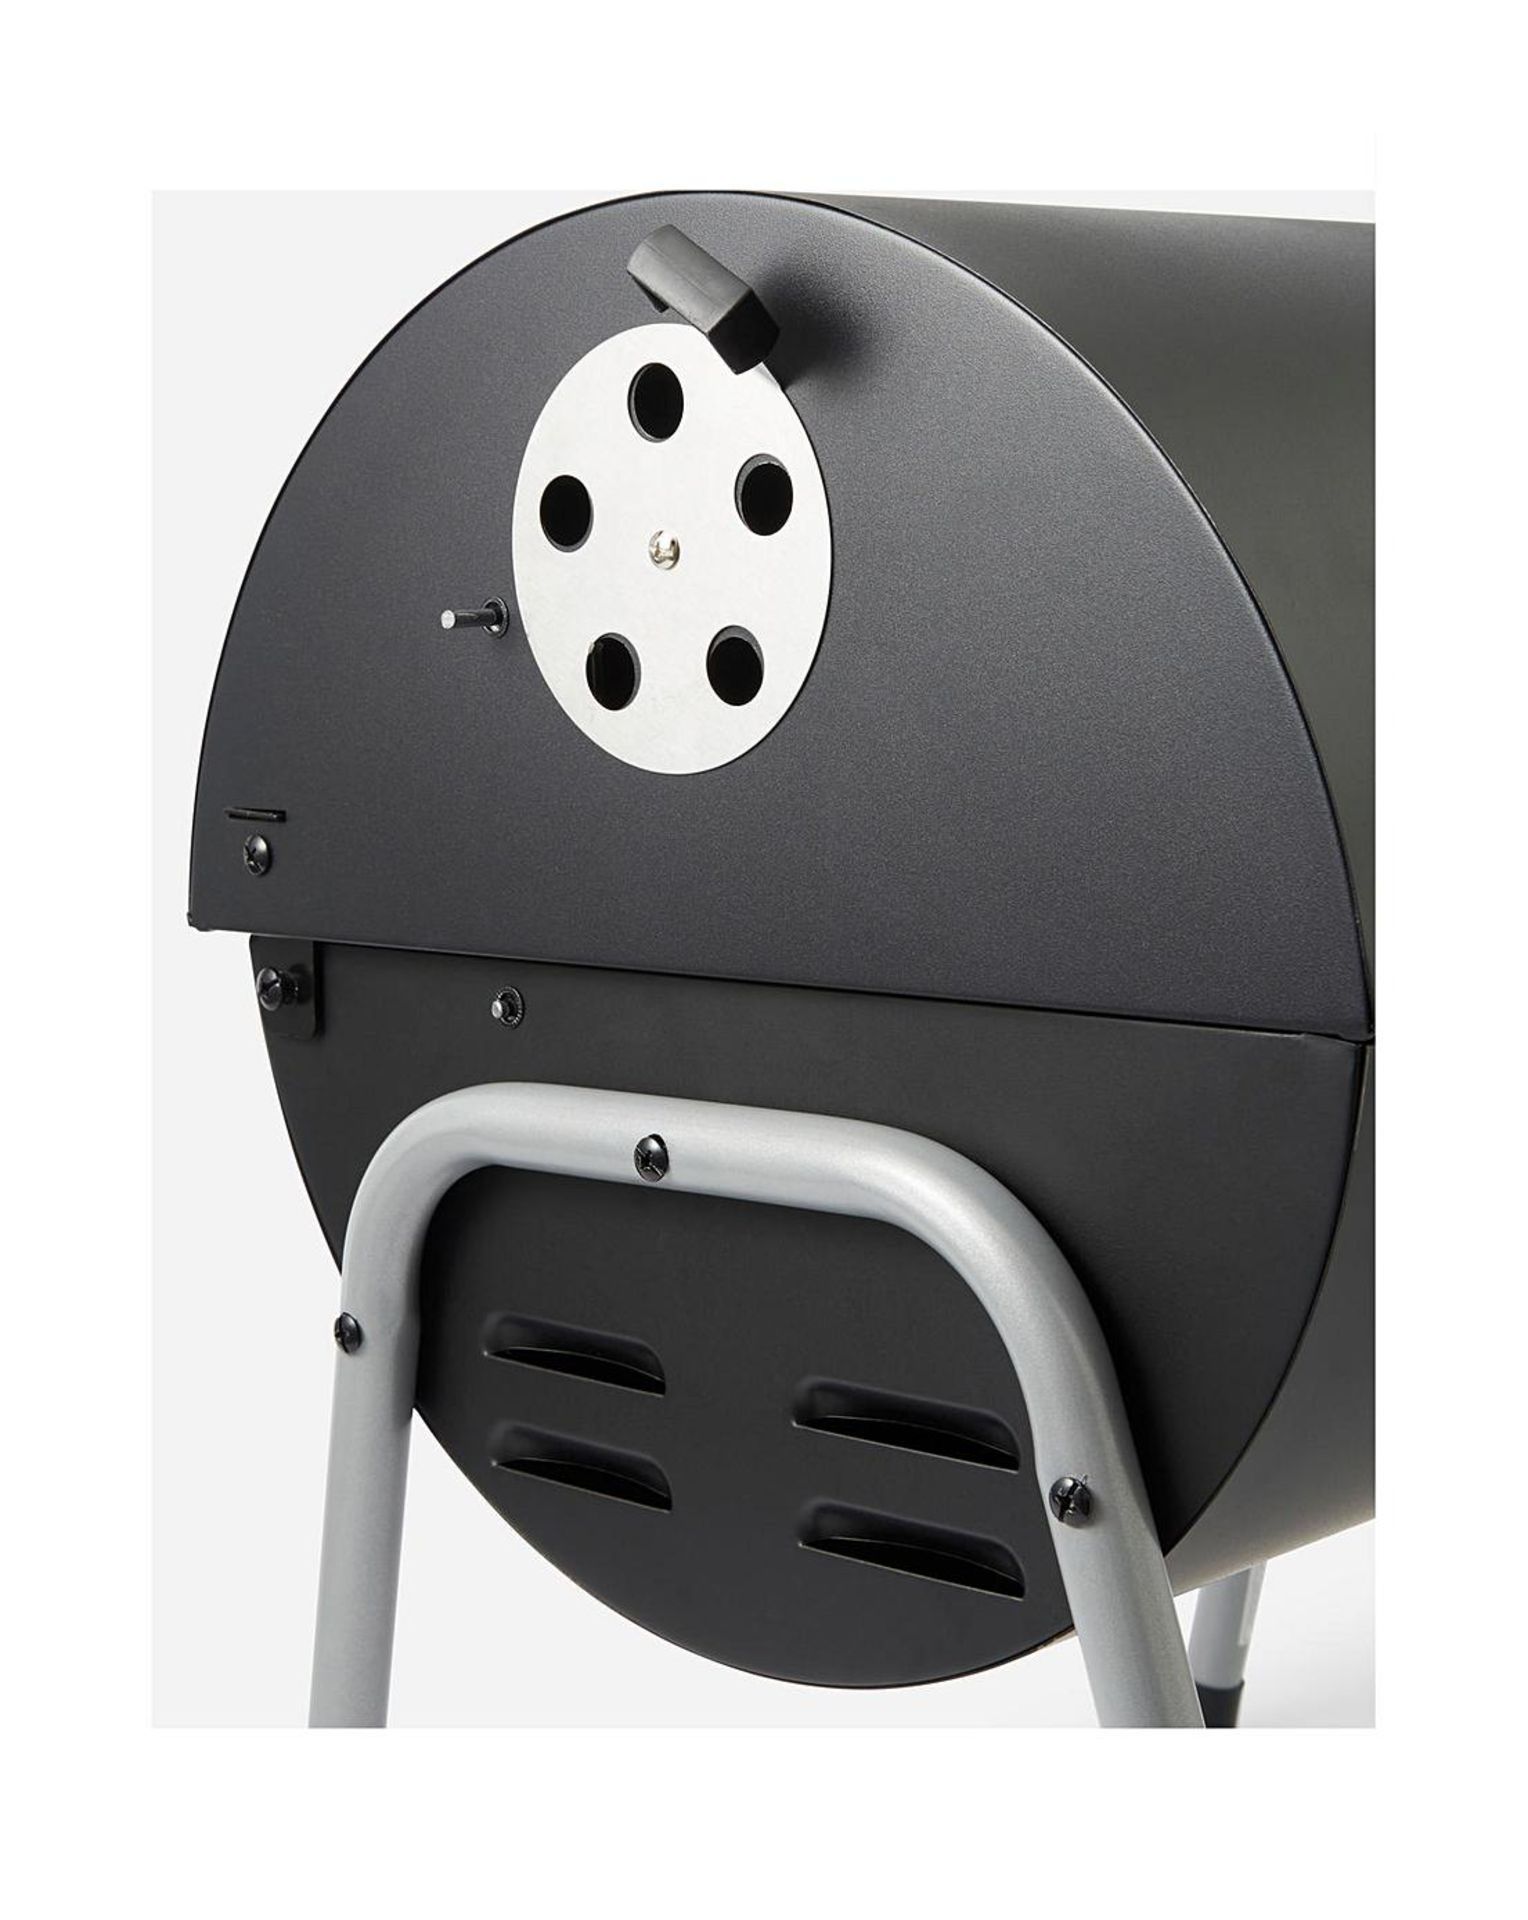 2x BRAND NEW Tabletop Oil Drum Barbeque Grill. RRP £59.99 EACH. Black steel firebowl with enamel - Bild 4 aus 4